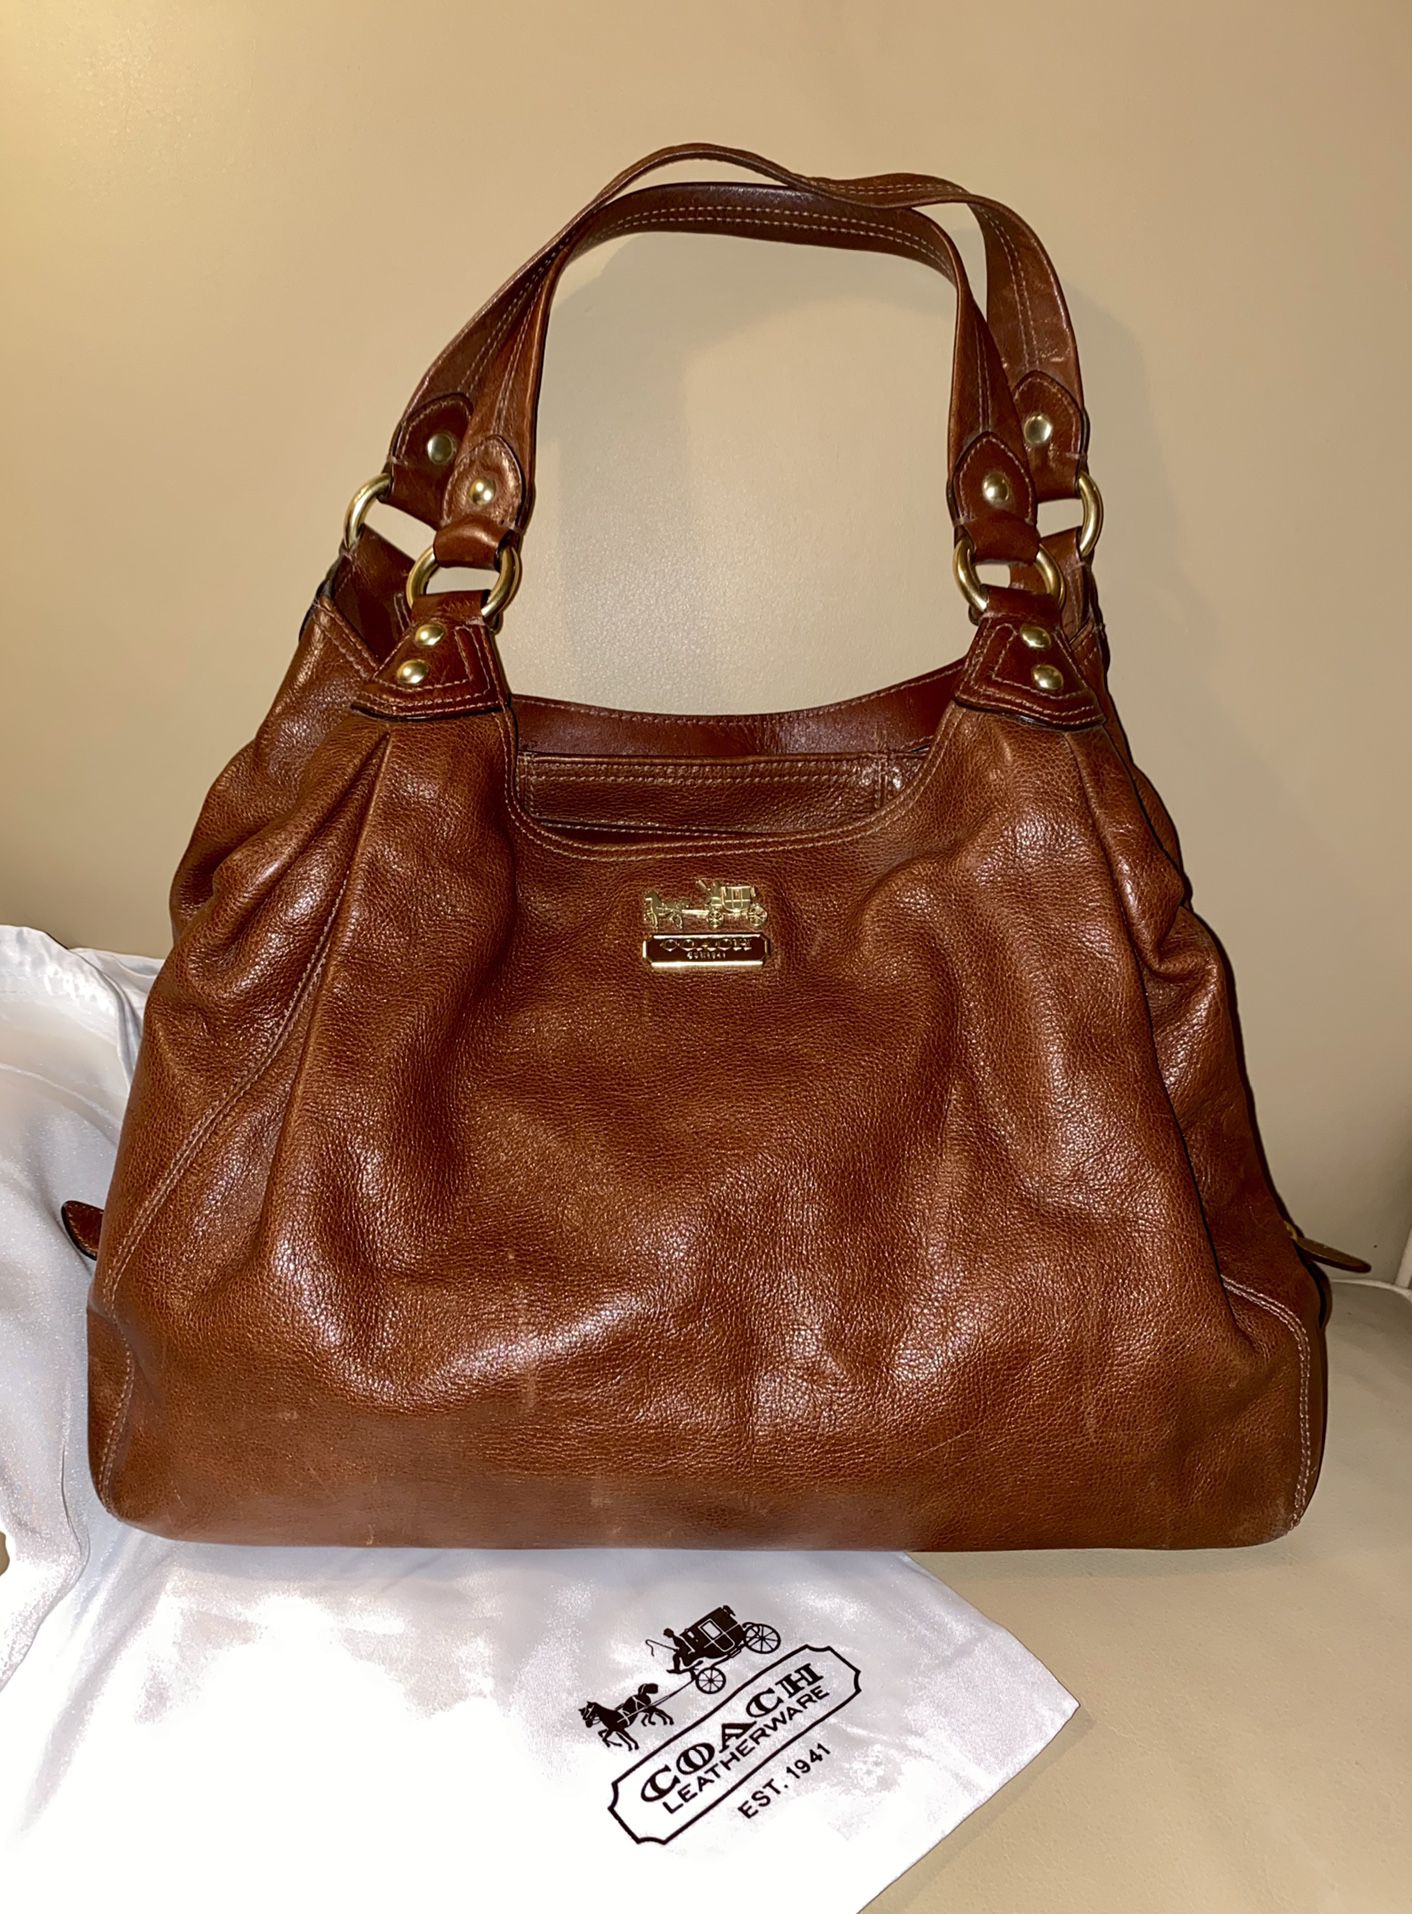 COACH Purse - Brown Leather lined in Light Pink